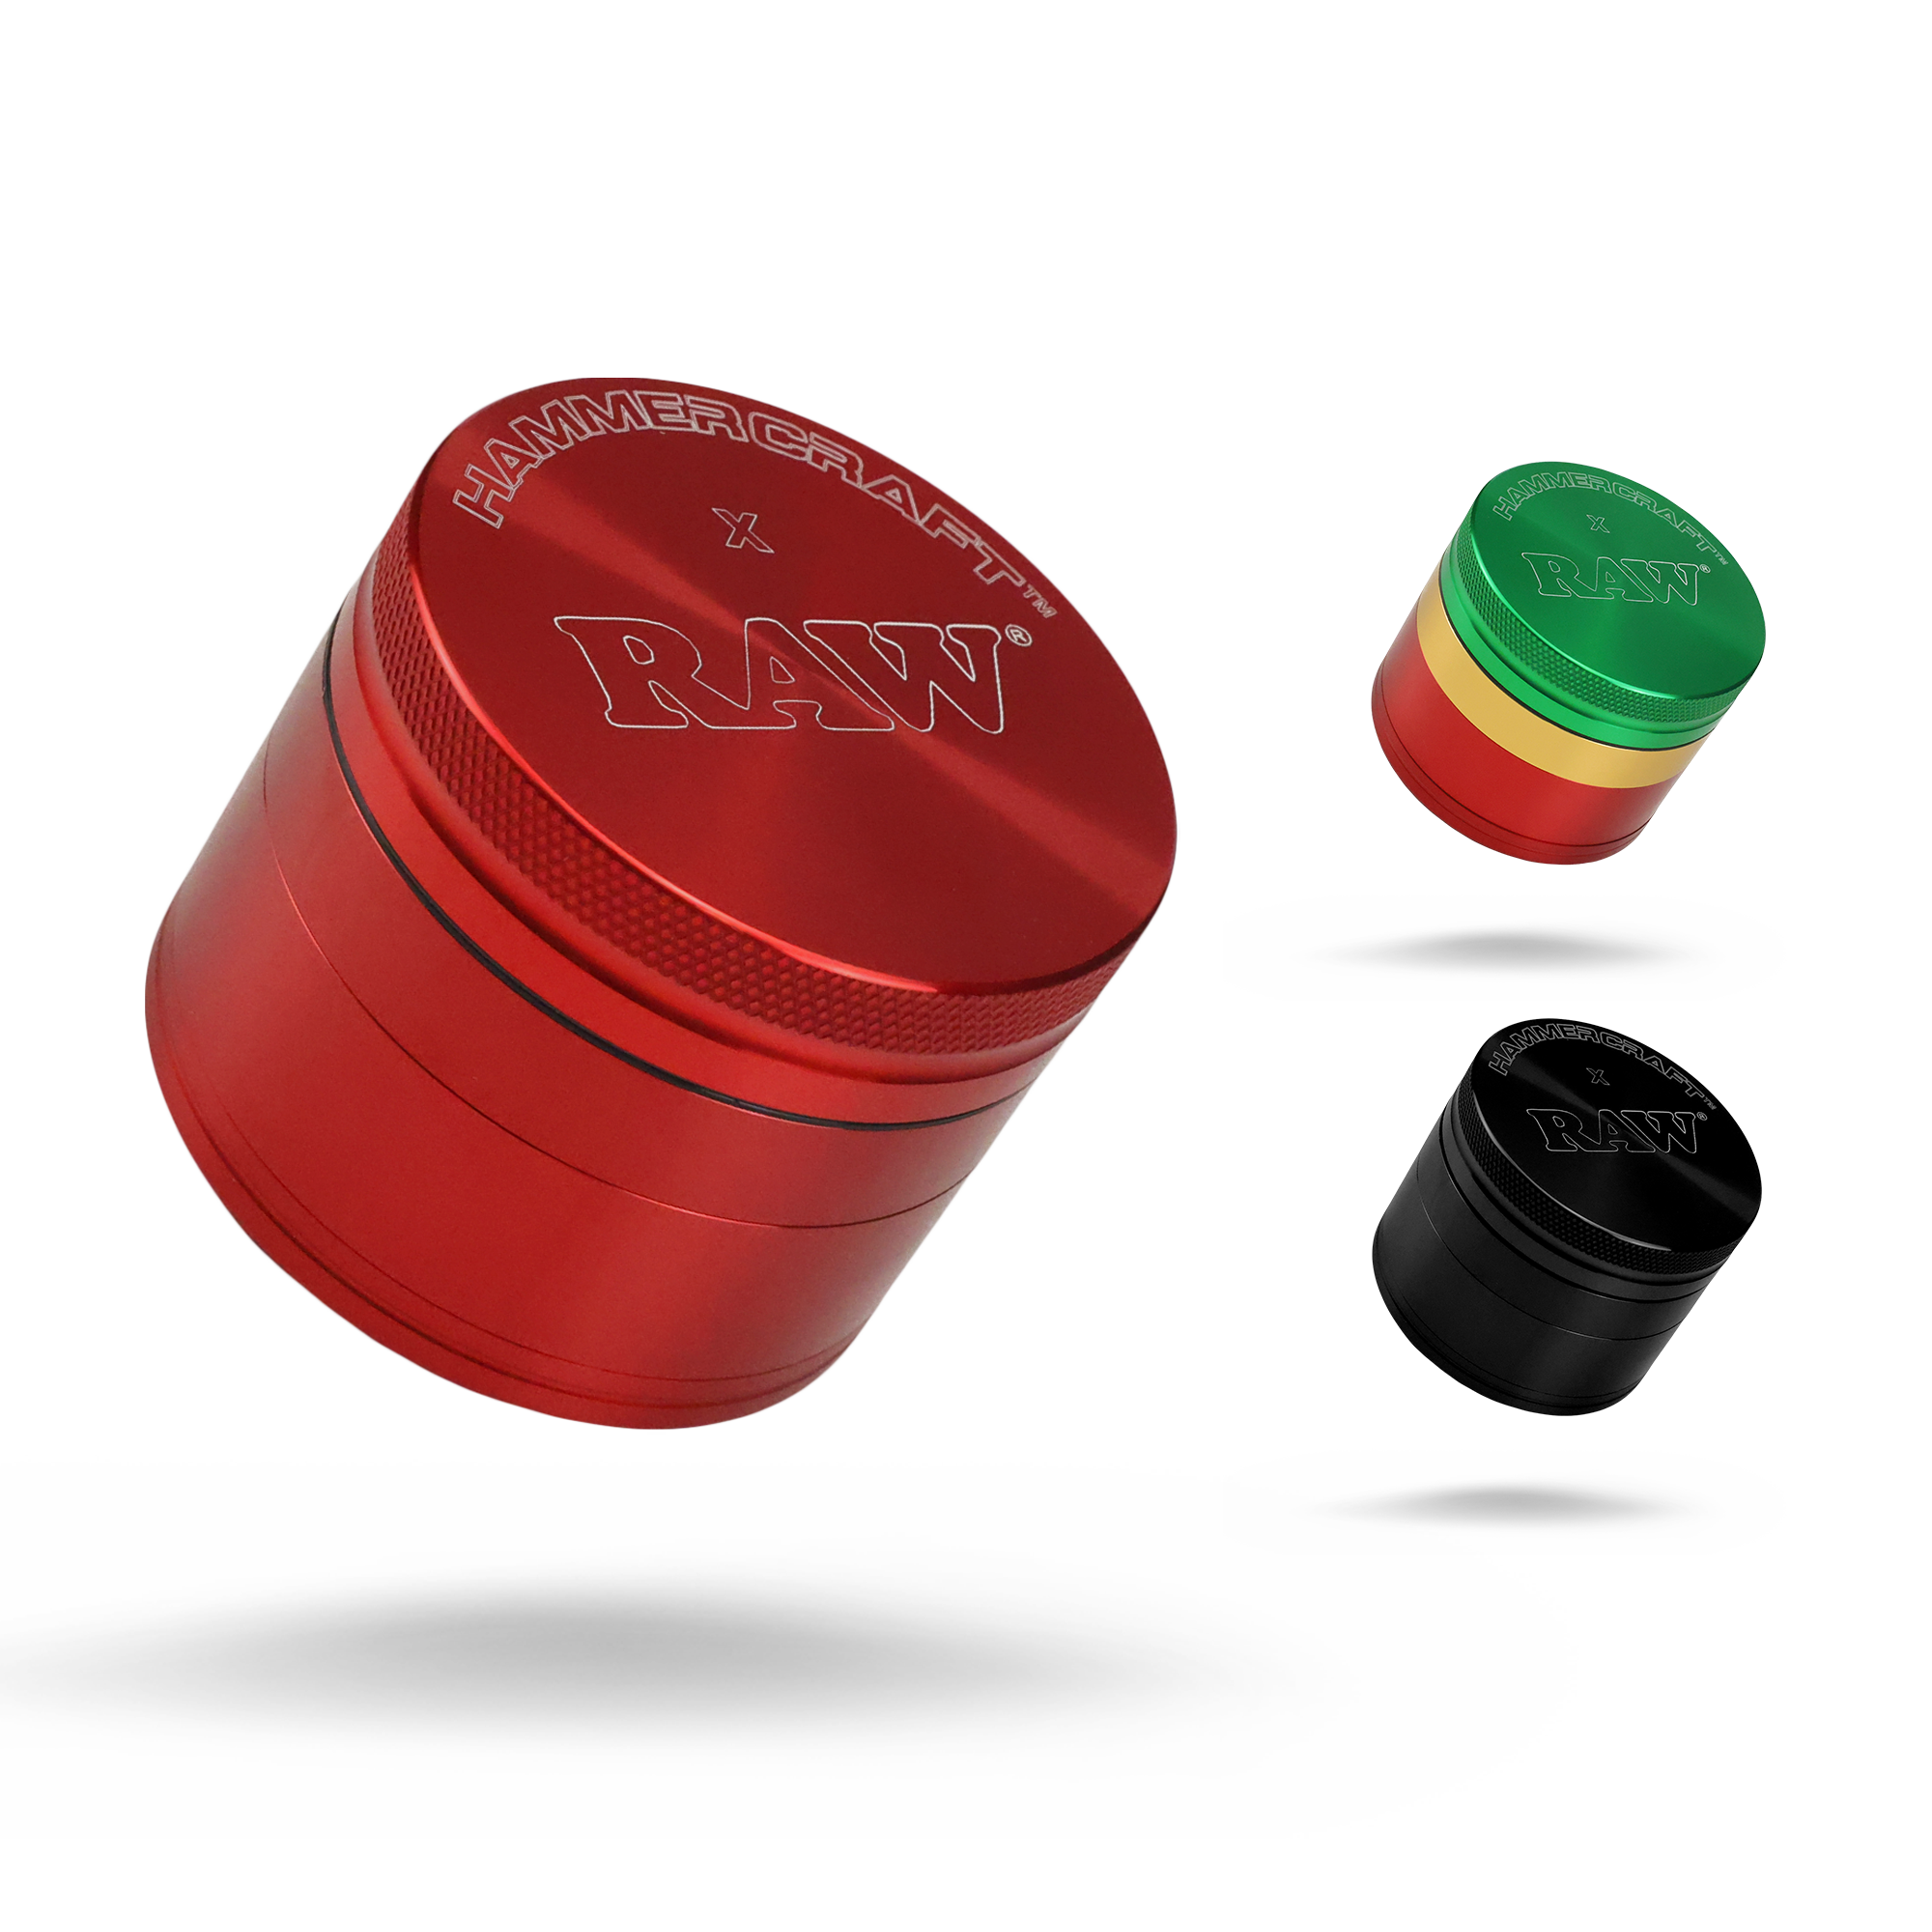 RAW x Hammer Craft Four Piece Aluminum Grinder Accessories esd-official